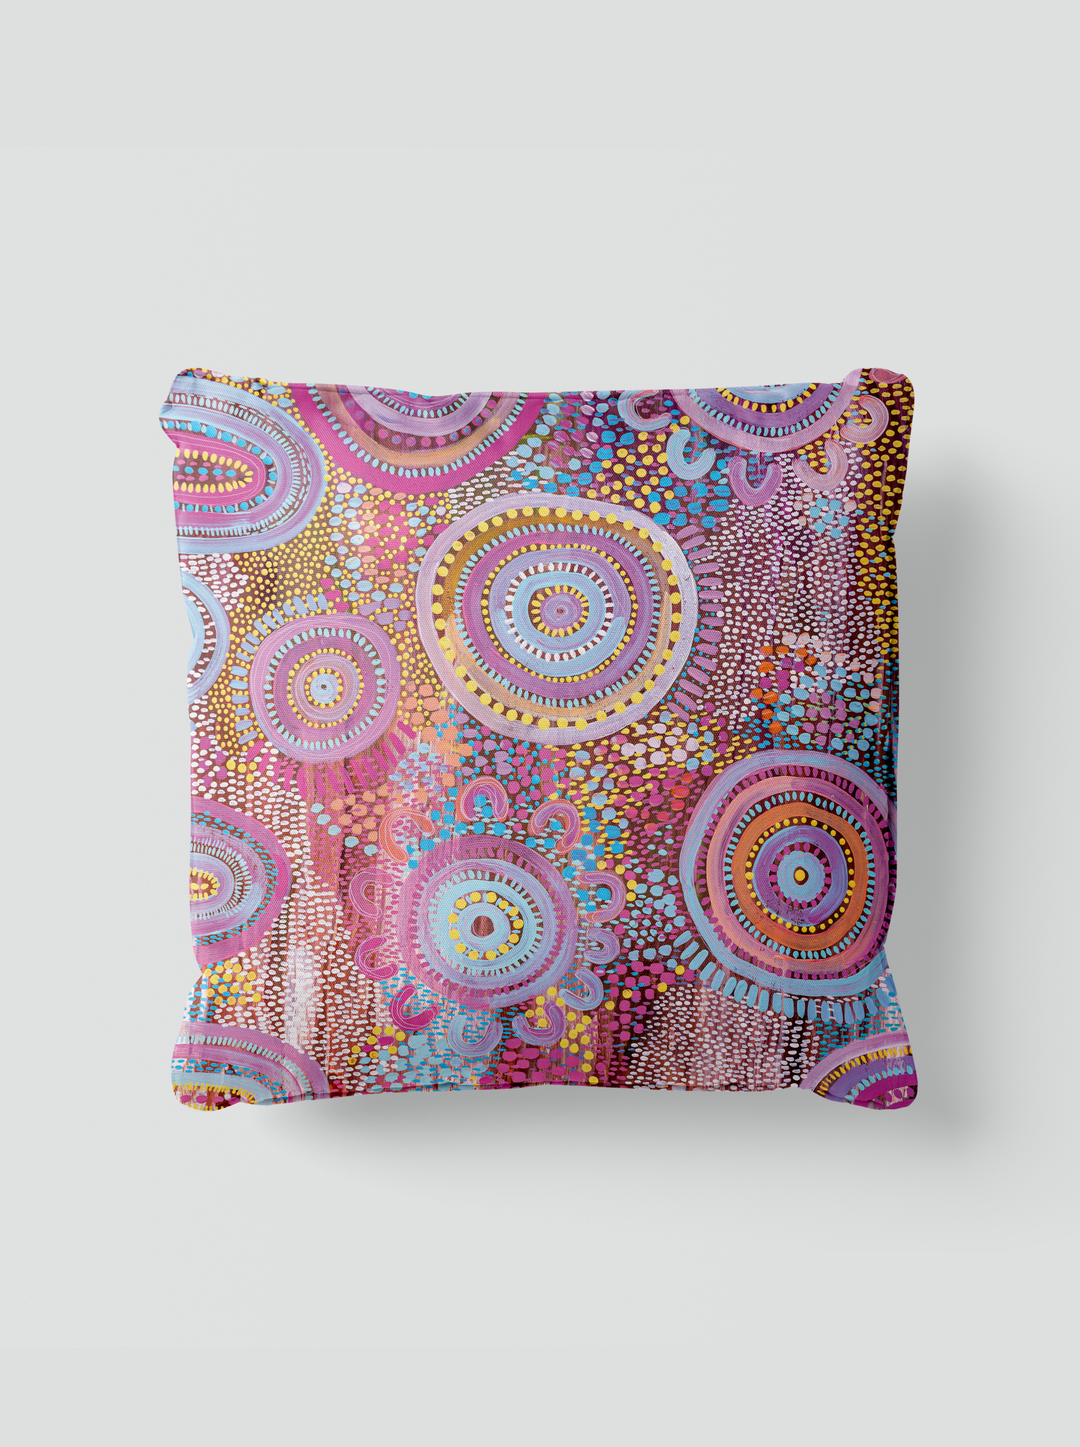 Let's Collect Seashells - Cushion Cover